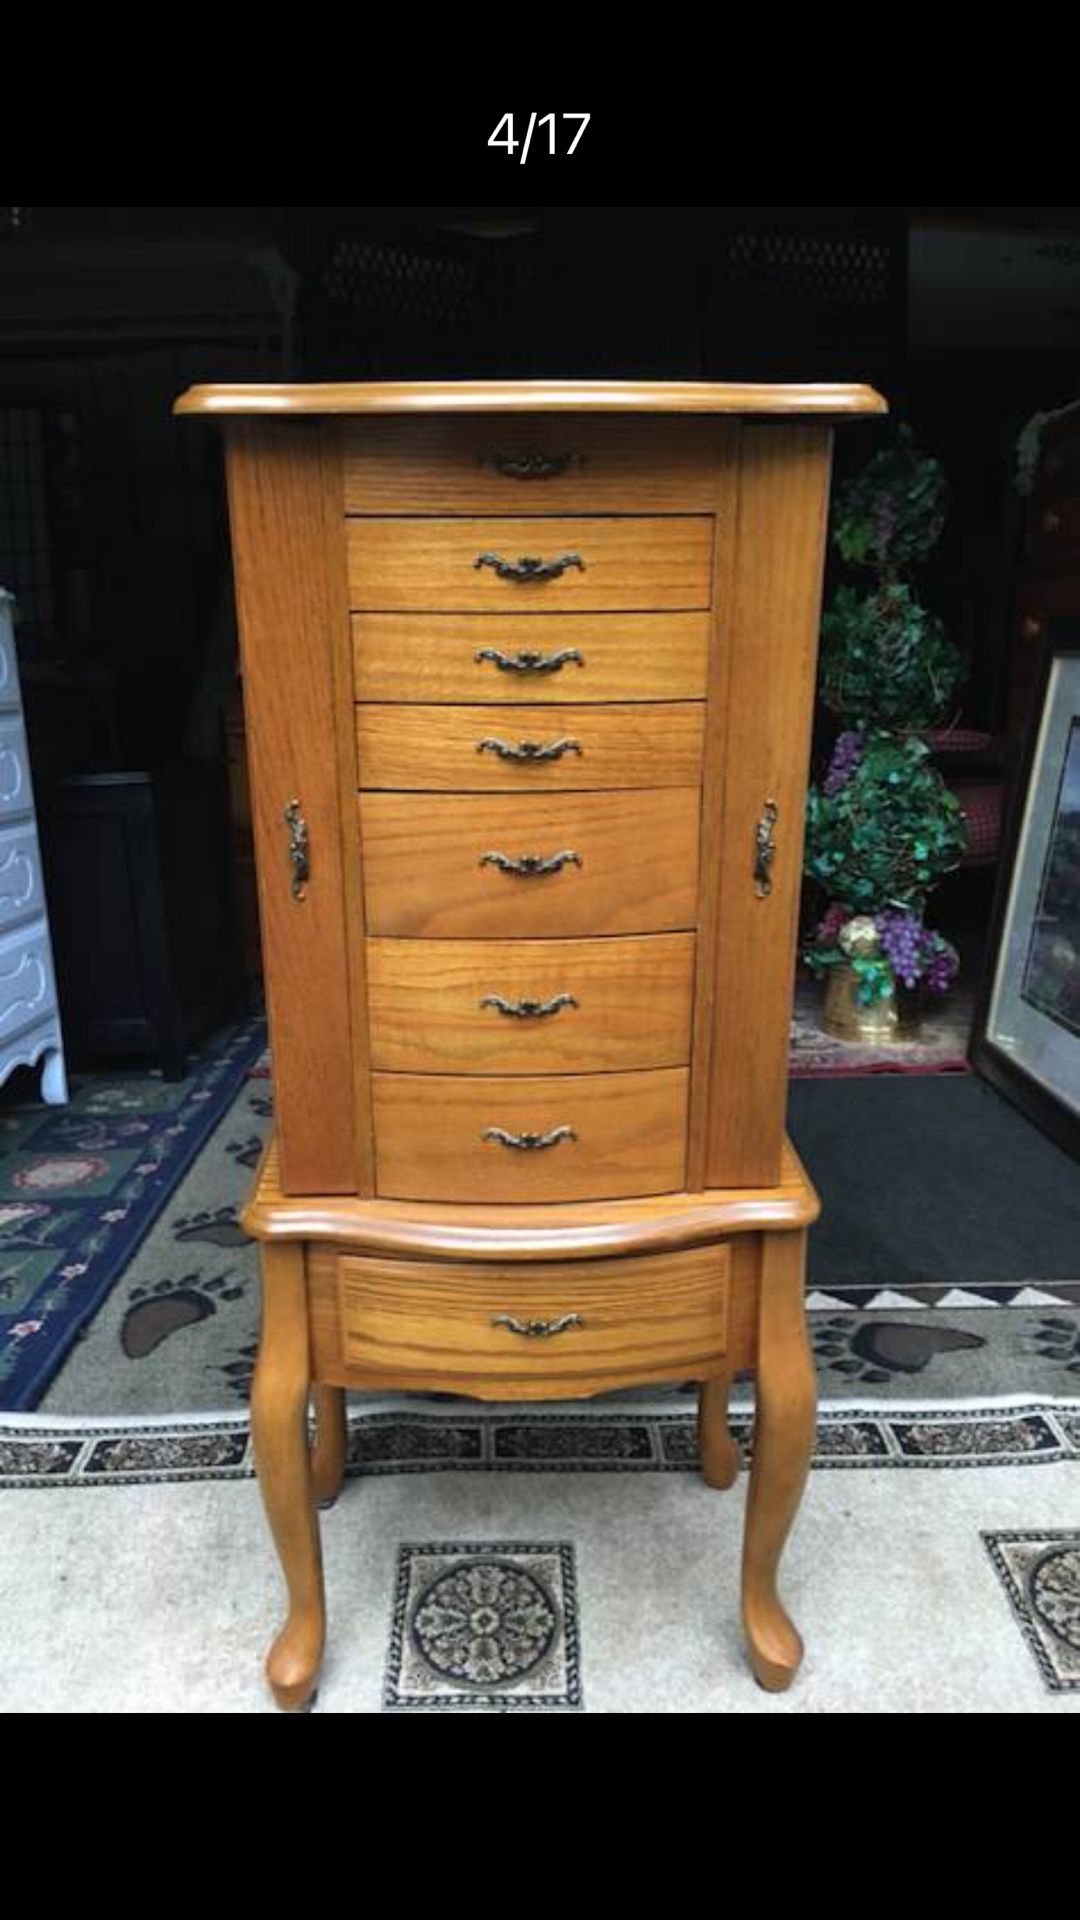 Jewelry Armoire w/Mirror - 8 Drawers, Velvet Linings (See Description)